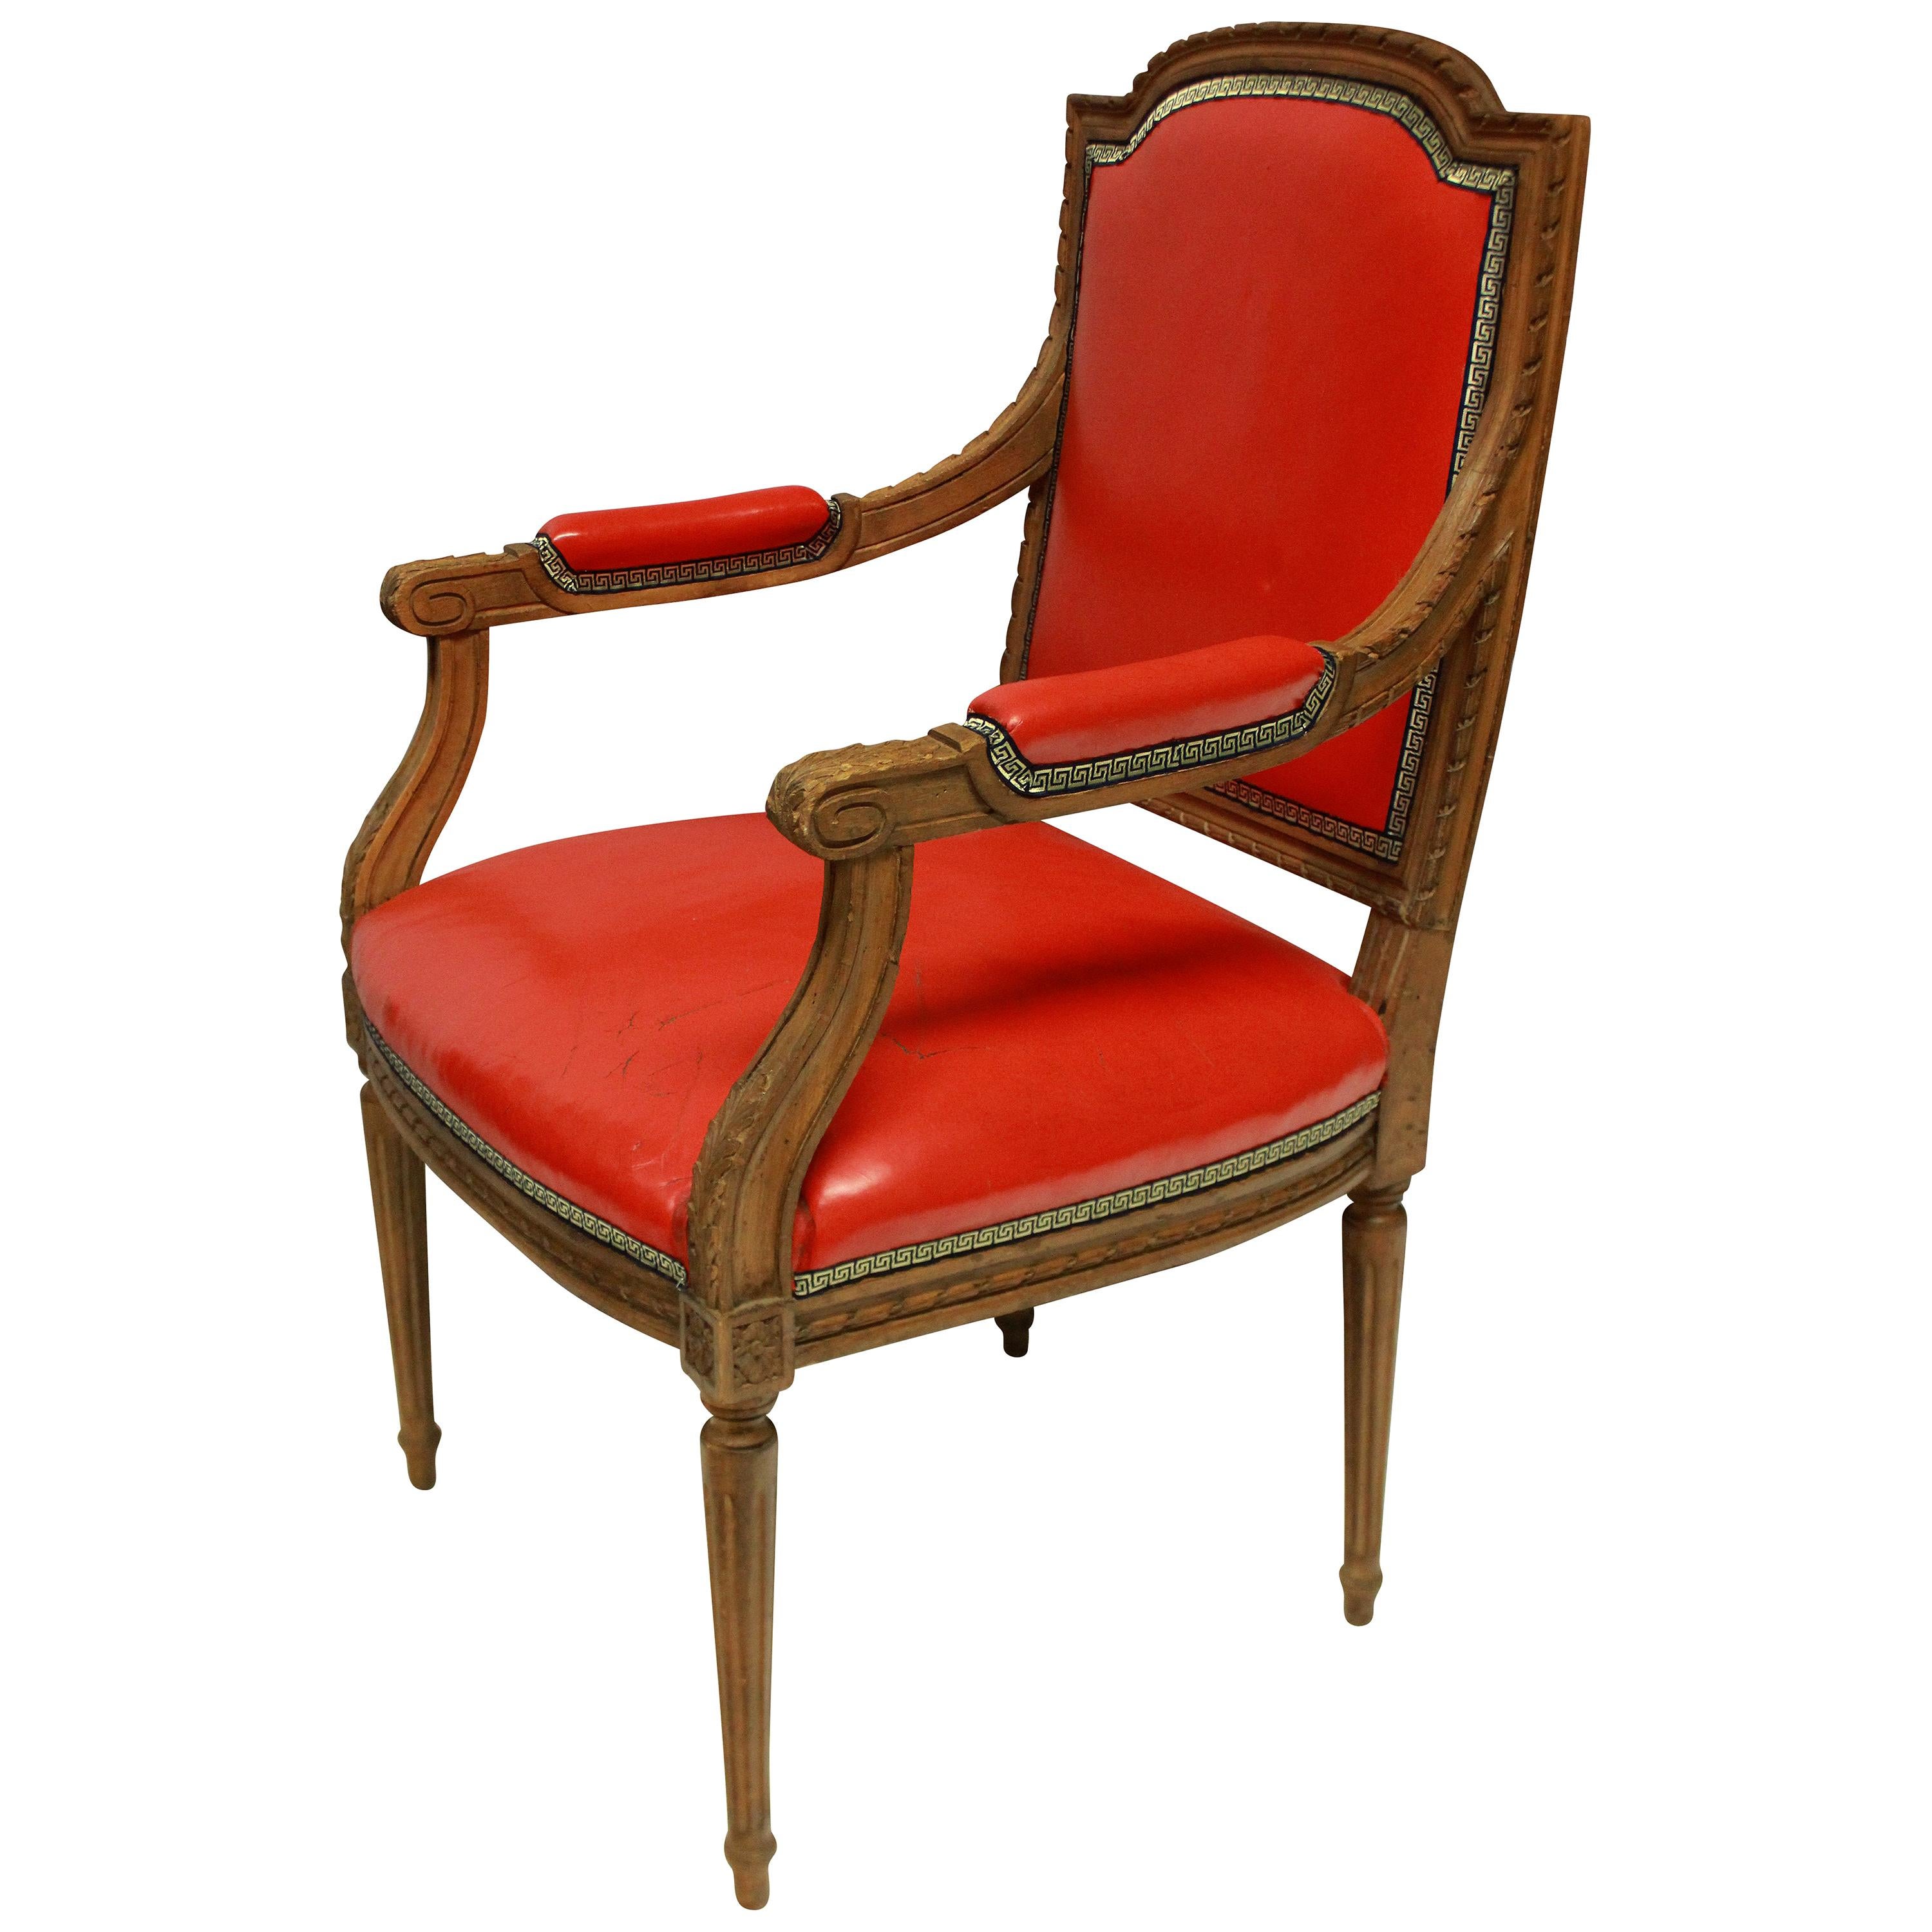 Louis XVI Style Armchair in Tomato Red Leather